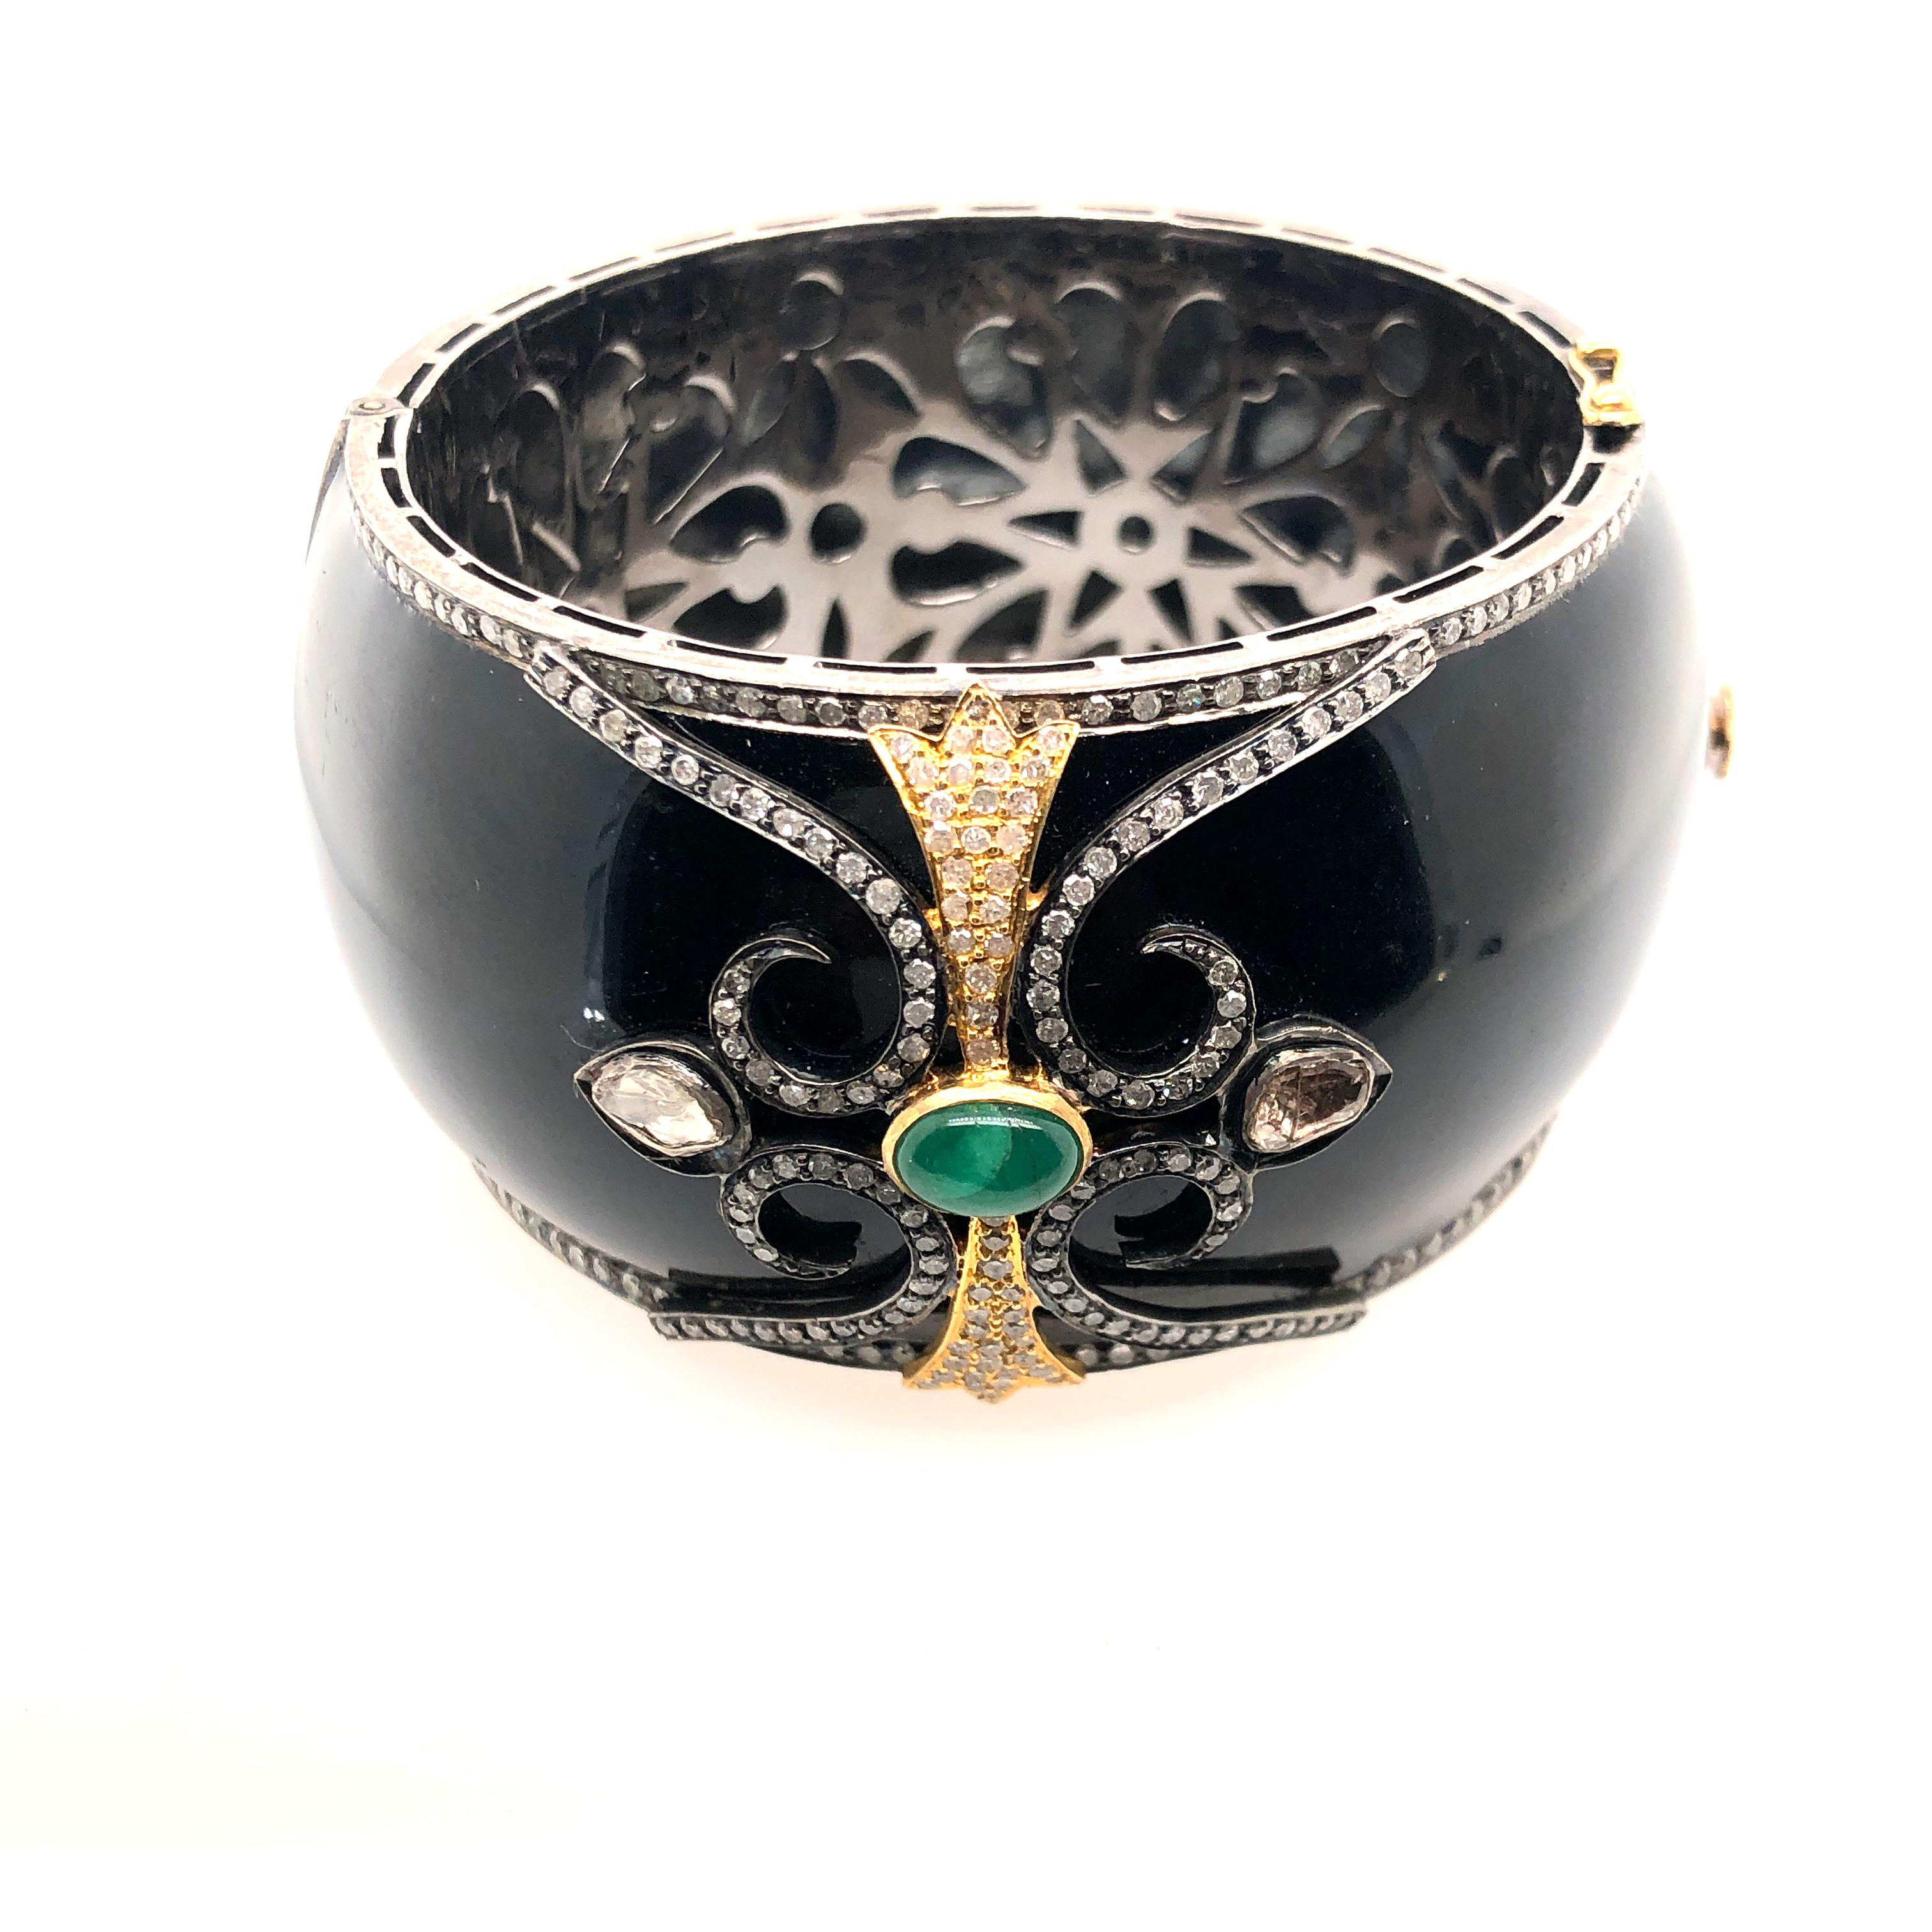 Designer black enamel bangle with diamond motif on top and around. This bangle is openable and has beautiful floral silver grill inside for smooth feel inside.

Closure: Box Clasp

14k: 5.74gms
Diamond: 5.1ct
Silver: 92.4gm
Emerald: 1.5ct